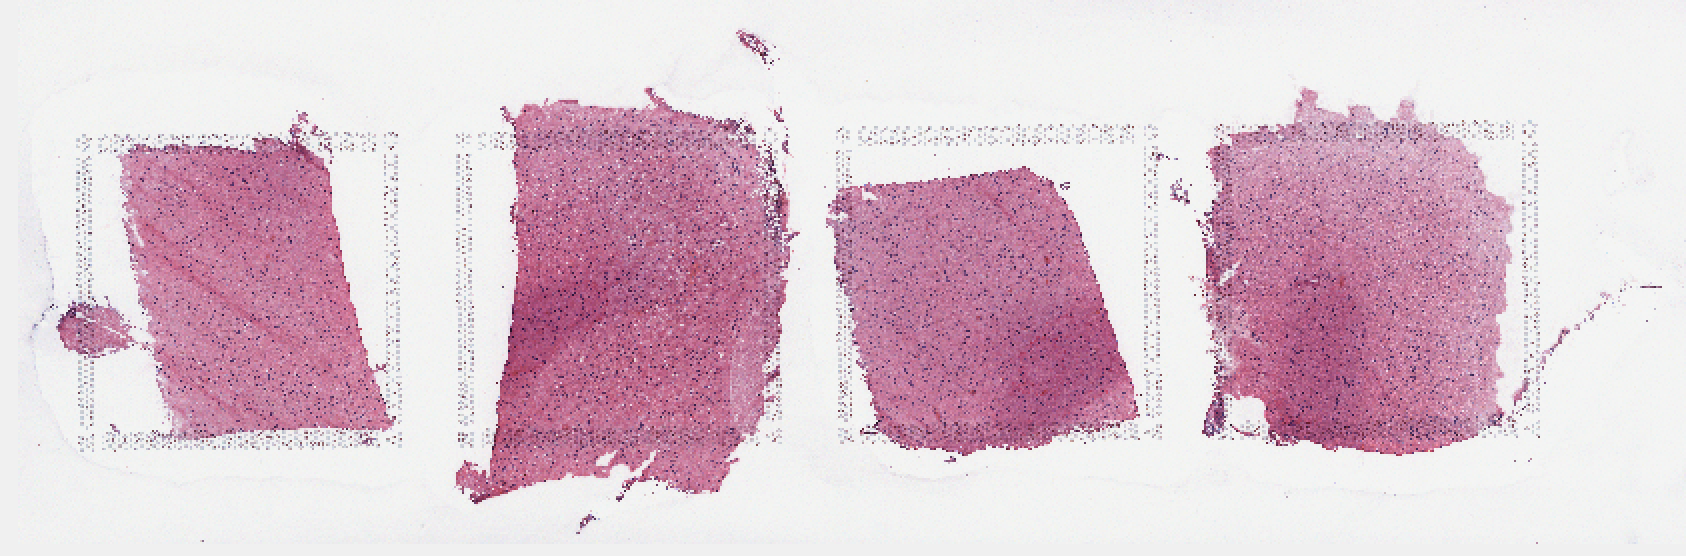 An example bright field image with four Visium tissue capture areas. Source: [`VistoSeg`](http://research.libd.org/VistoSeg/step-1-split-visium-histology-whole-slide-image-into-individual-capture-area-images.html).